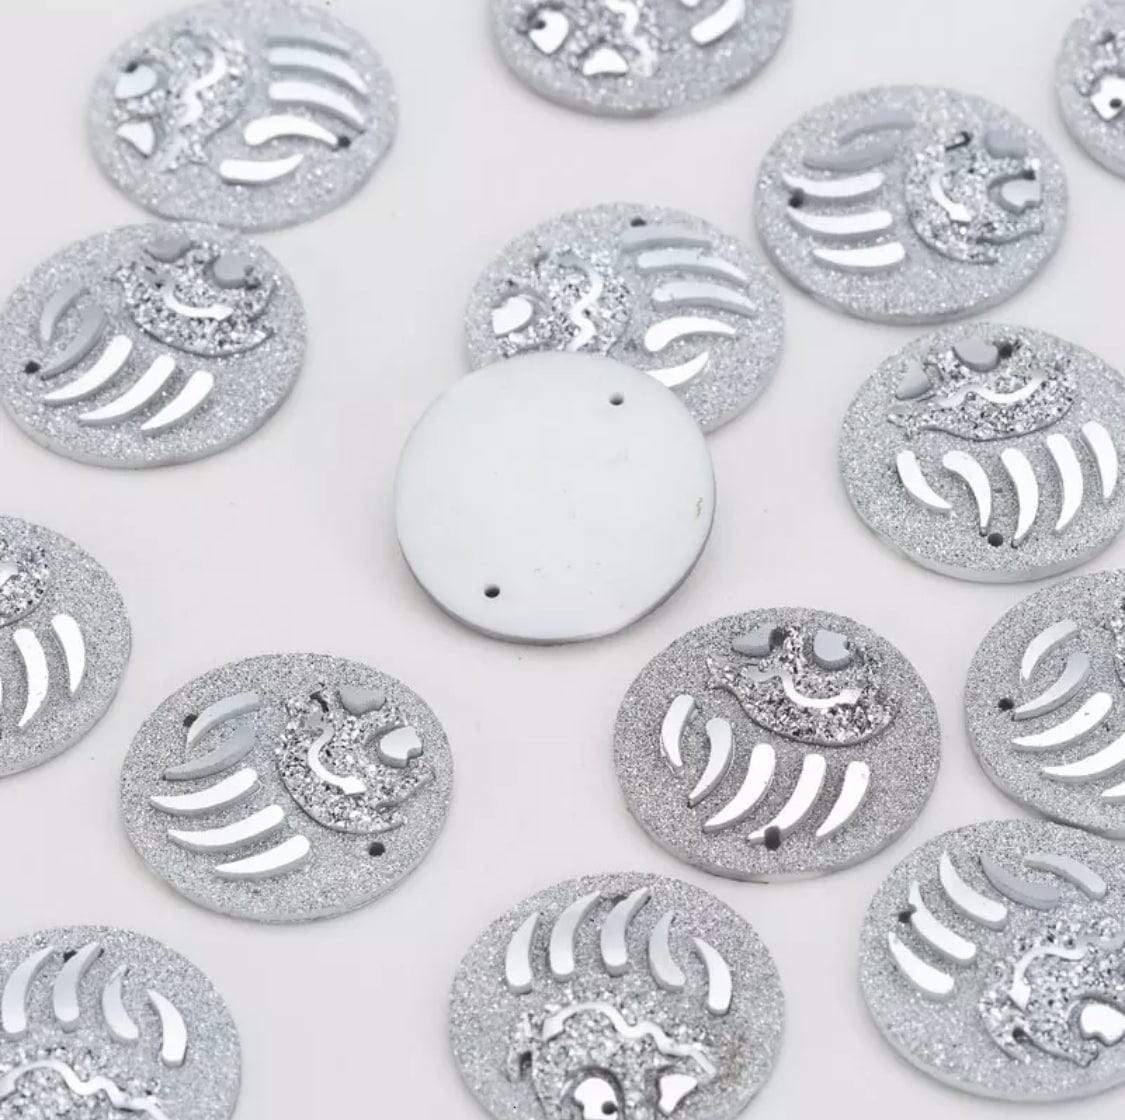 Sundaylace Creations & Bling Resin Gems Metallic Silver 25mm Bear CLAW PAW print, *New in AB and Metallic Finish Circle/Round, Sew on, Resin Gem (Sold in Pair)